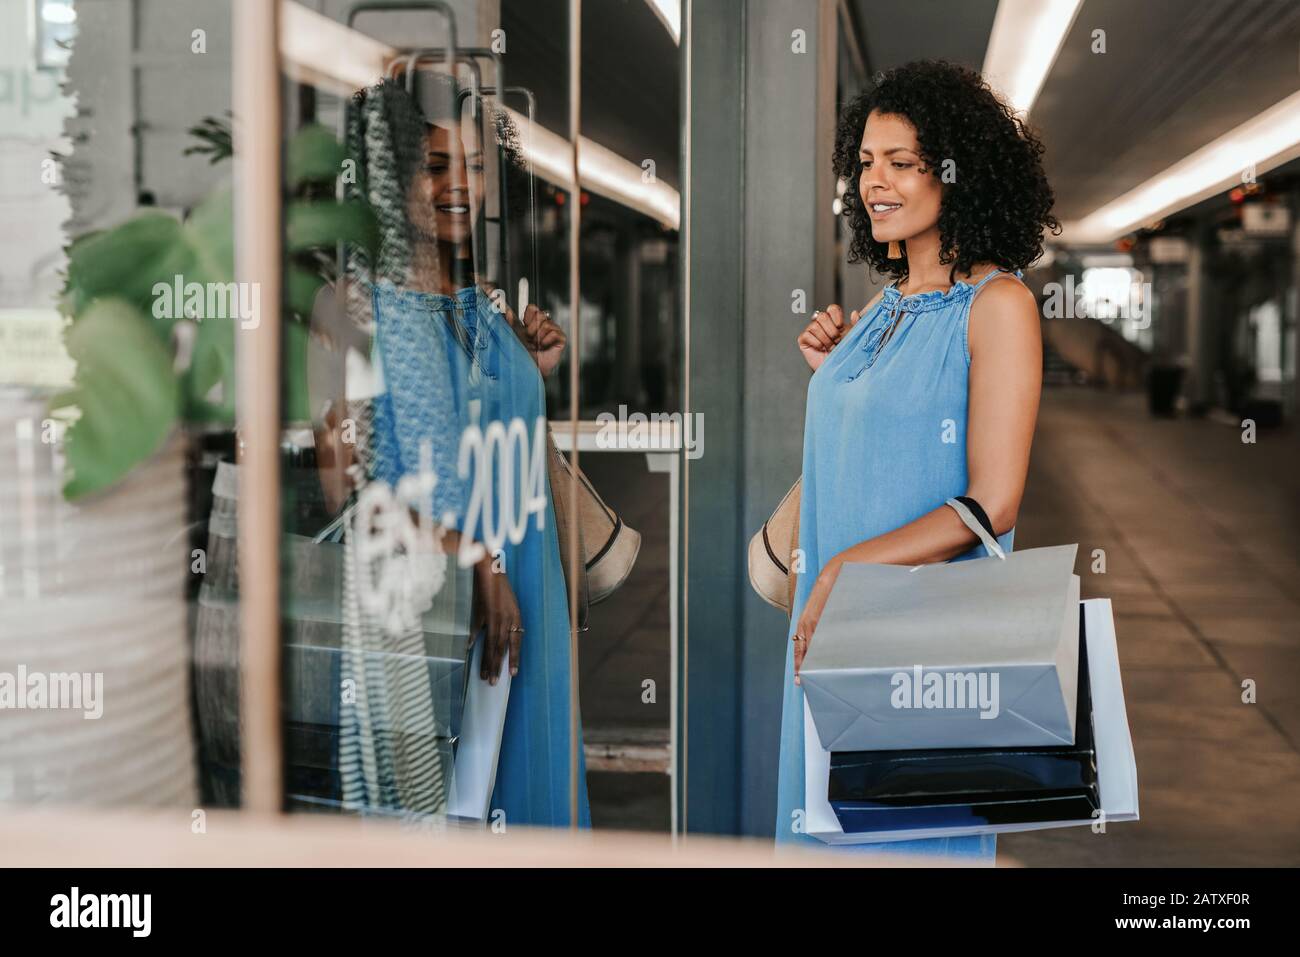 Smiling young woman window shopping in a mall Stock Photo